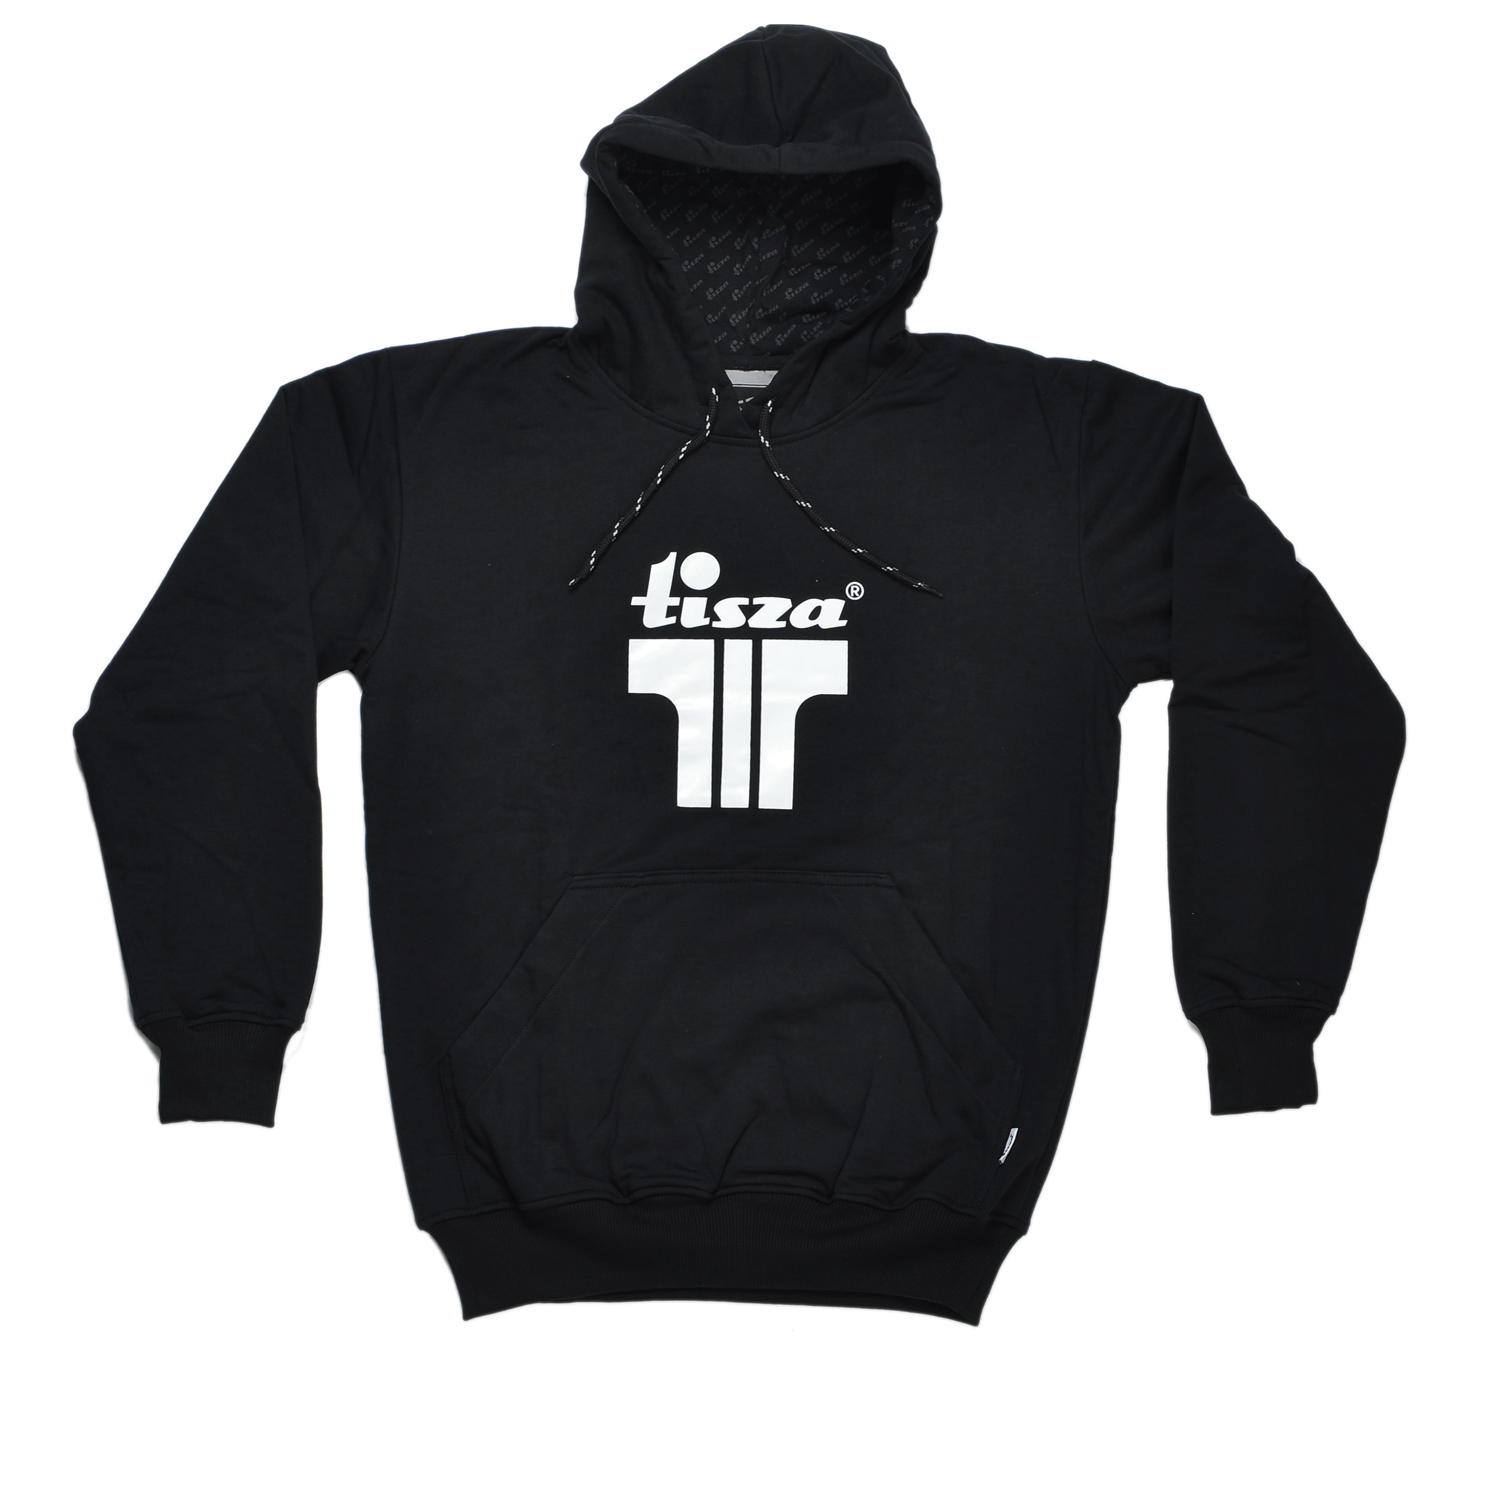 Tisza shoes - Pullover - Black hoodie